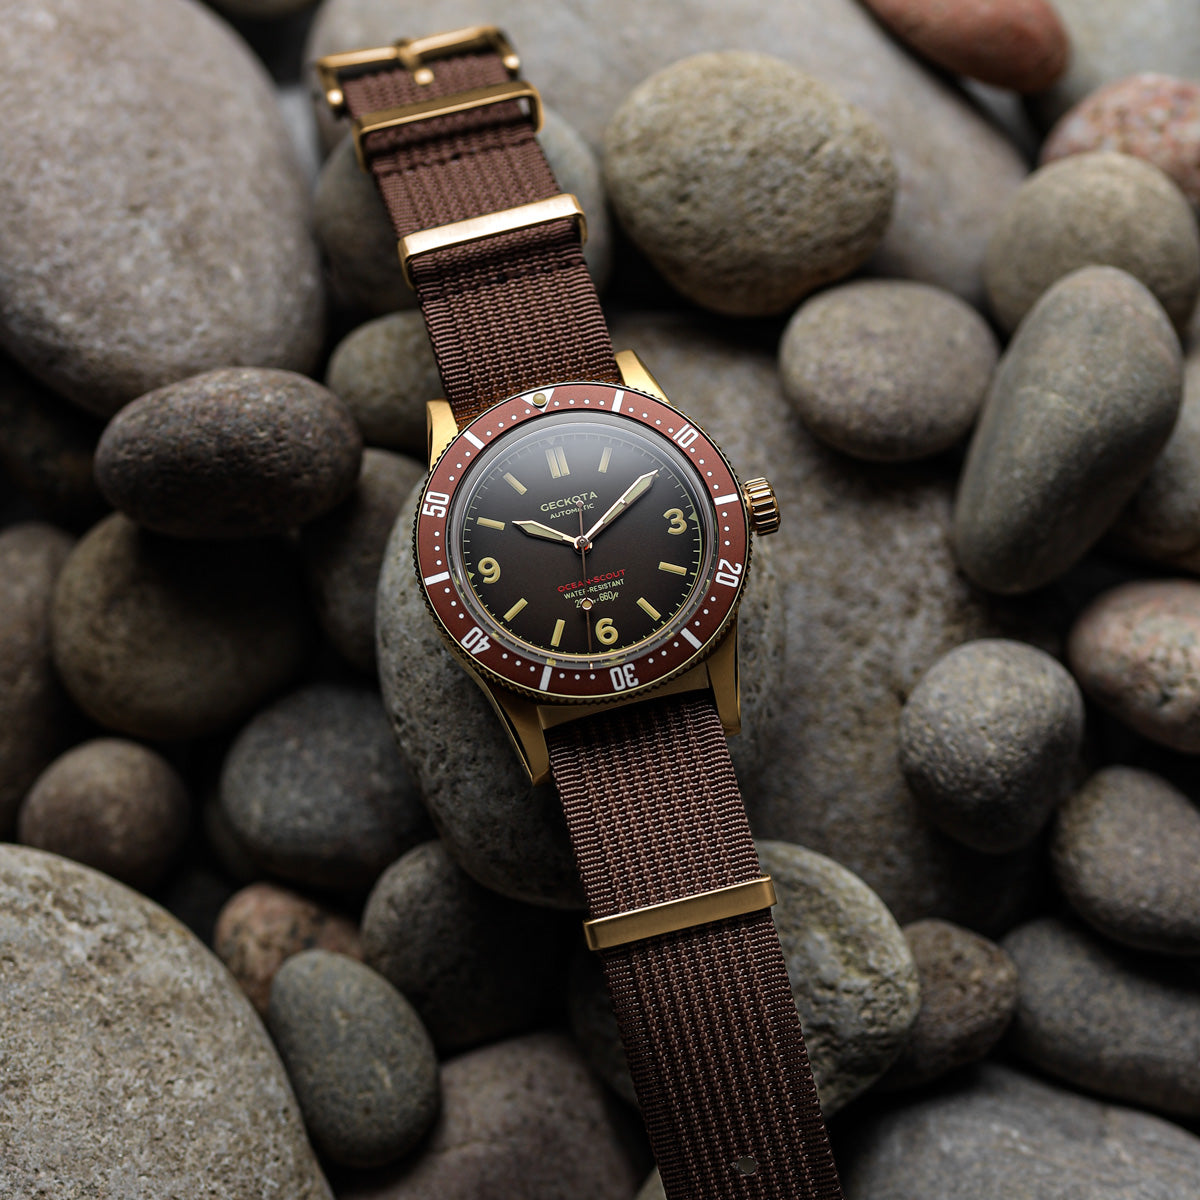 Geckota Ocean-Scout Nylon Watch Strap - Brown - Gold Buckle - 20mm - additional image 3